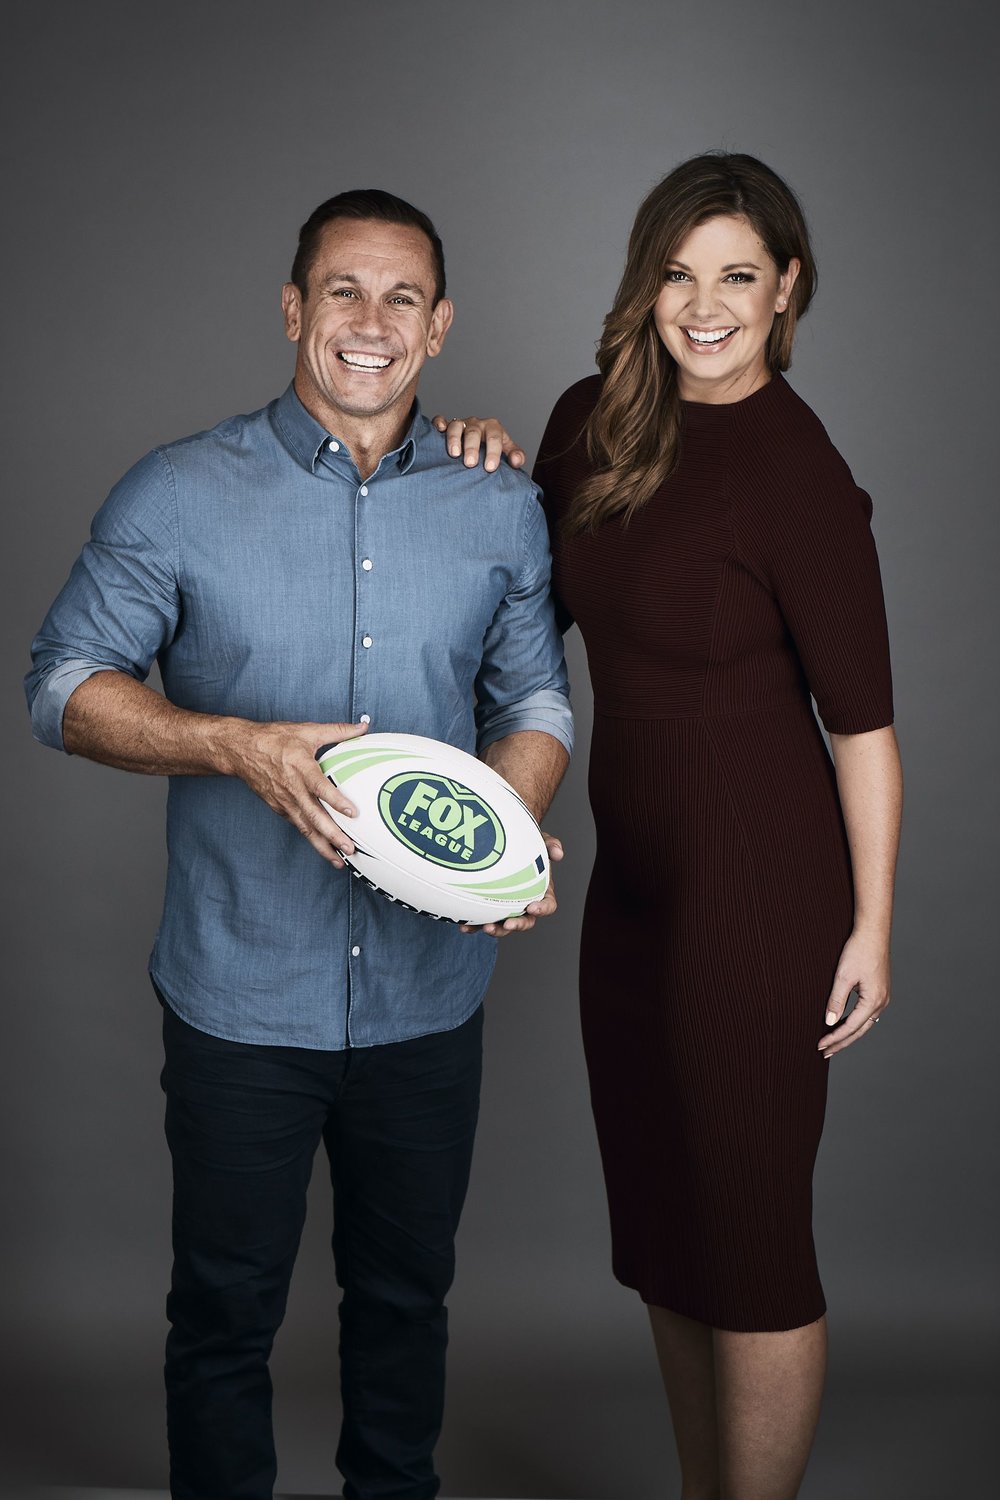 Yvonne Sampson and Matty Johns. image - supplied/Fox Sports